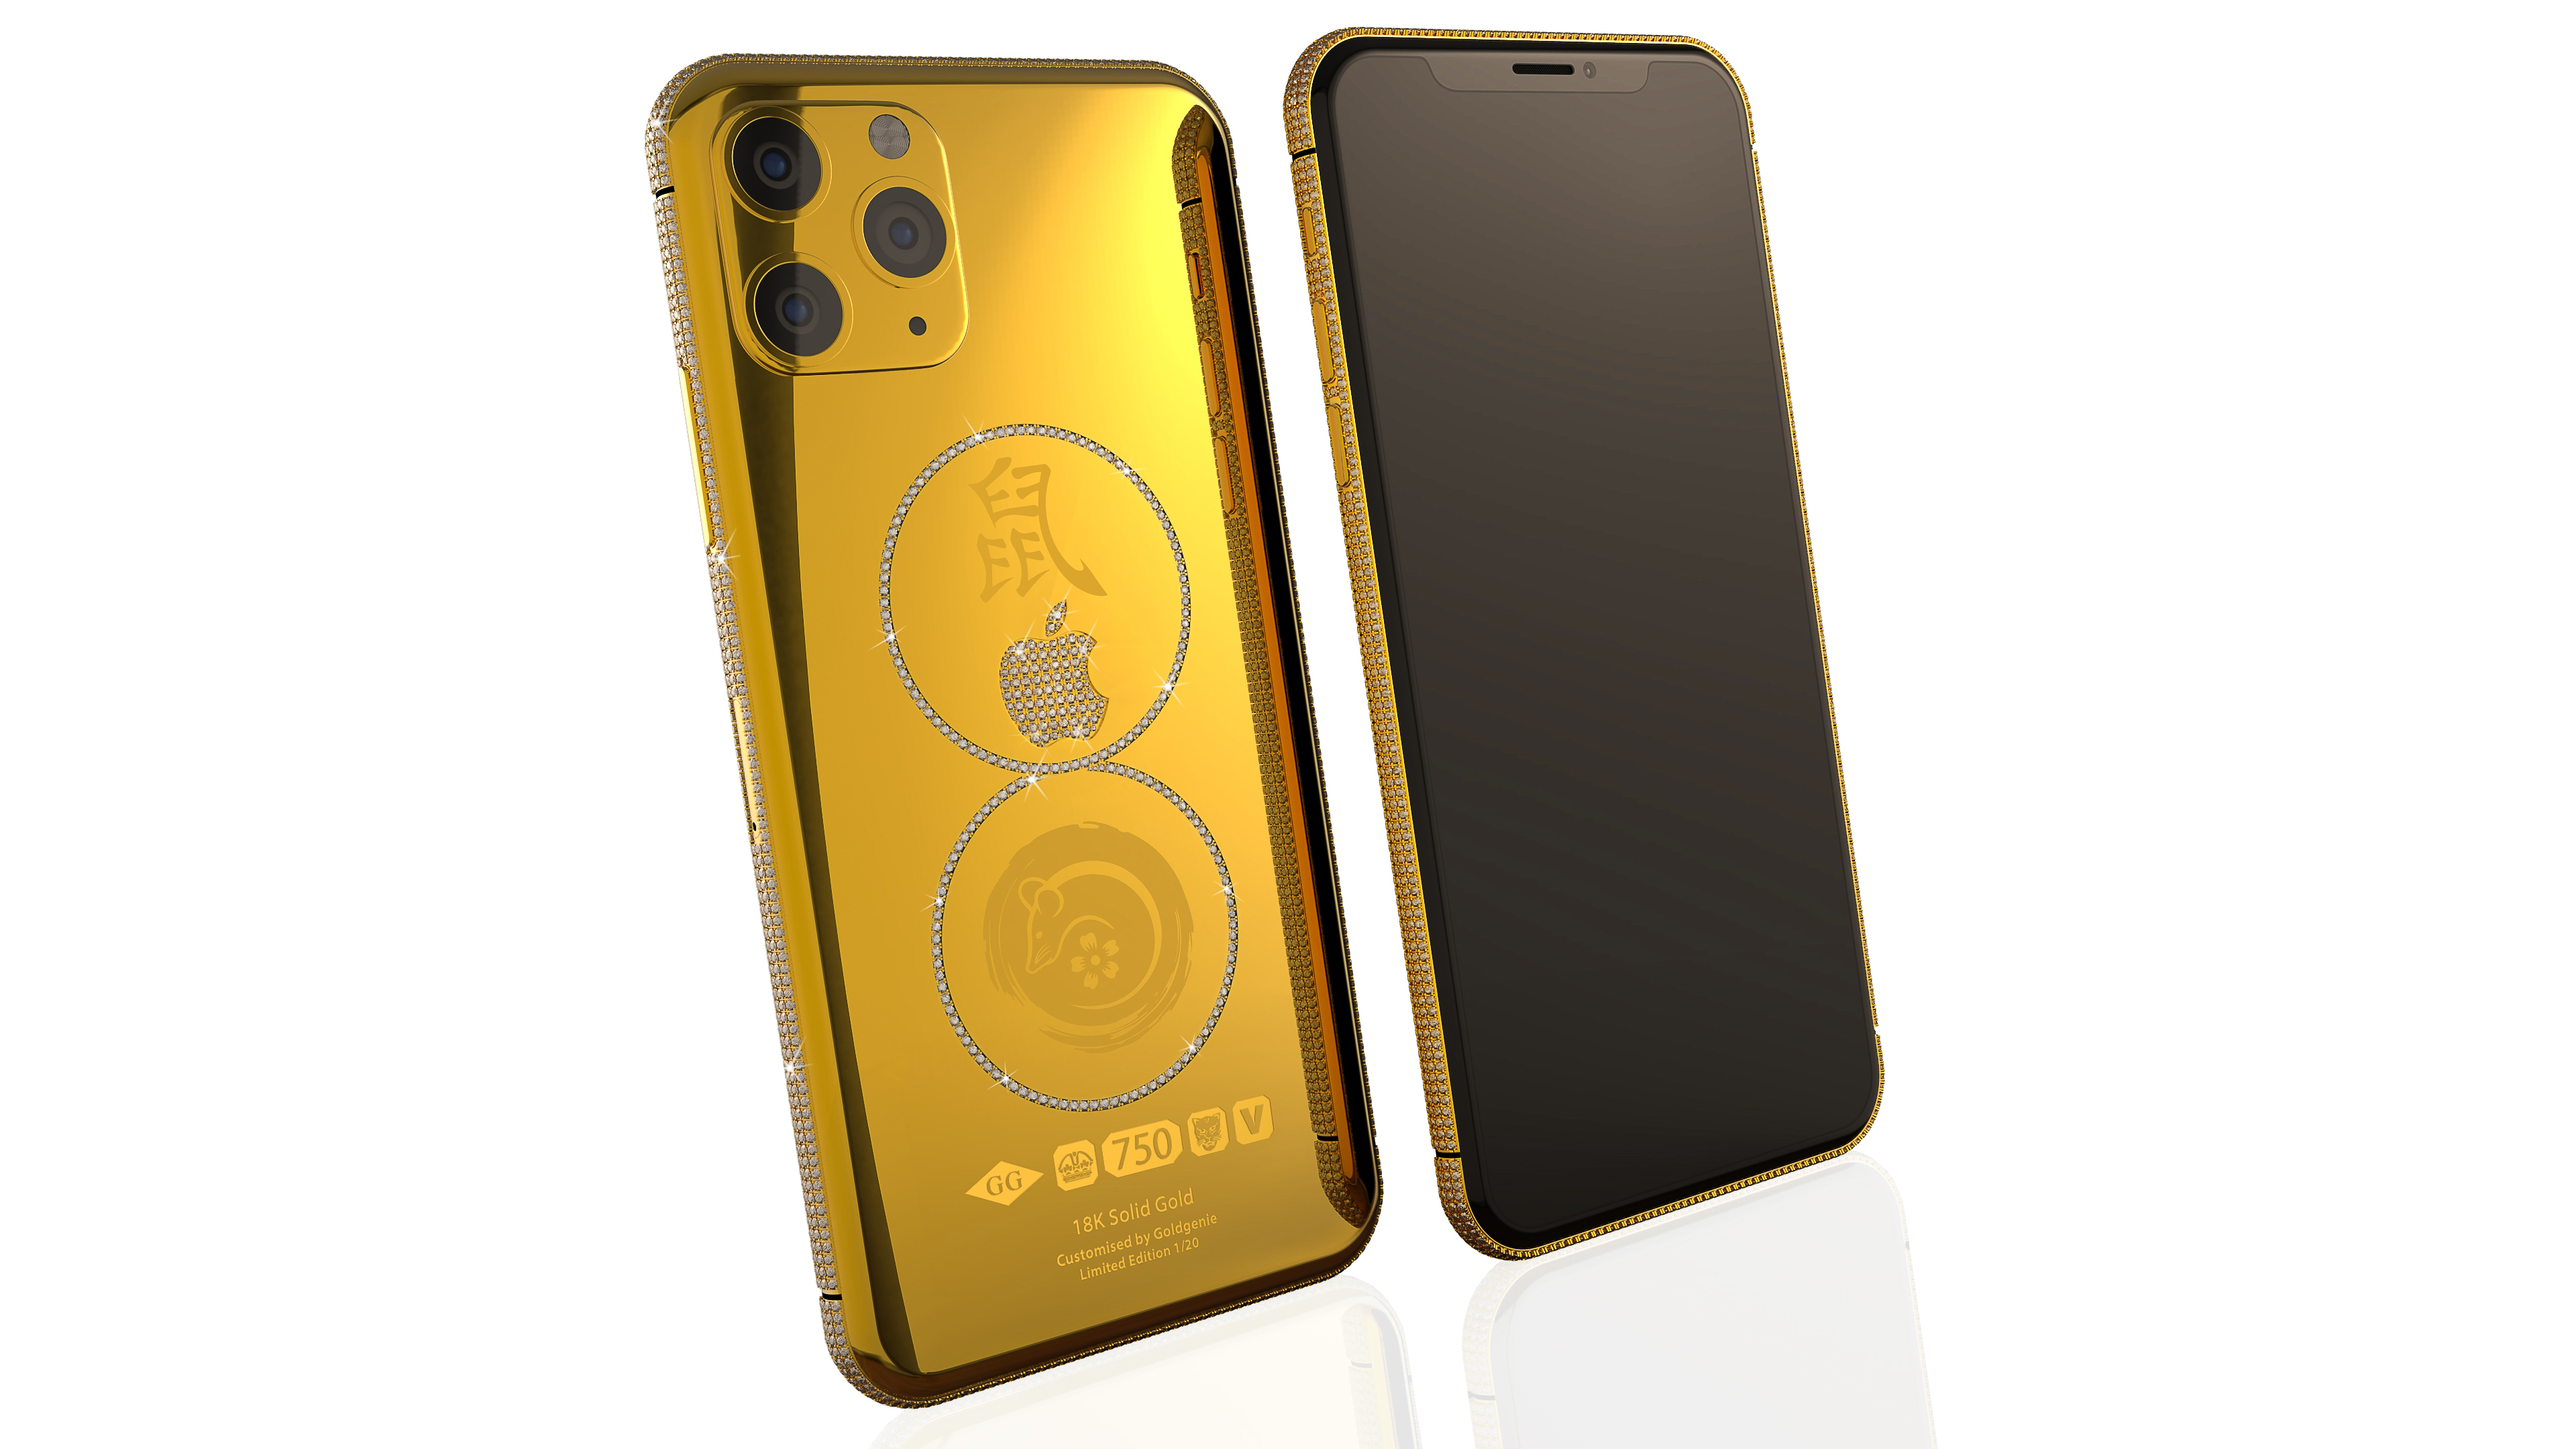 18k solid.gold Diamond iPhone 11 straight white.SW G CHINESE 2 Million Pound Year Of The Rat Gold iPhone Range